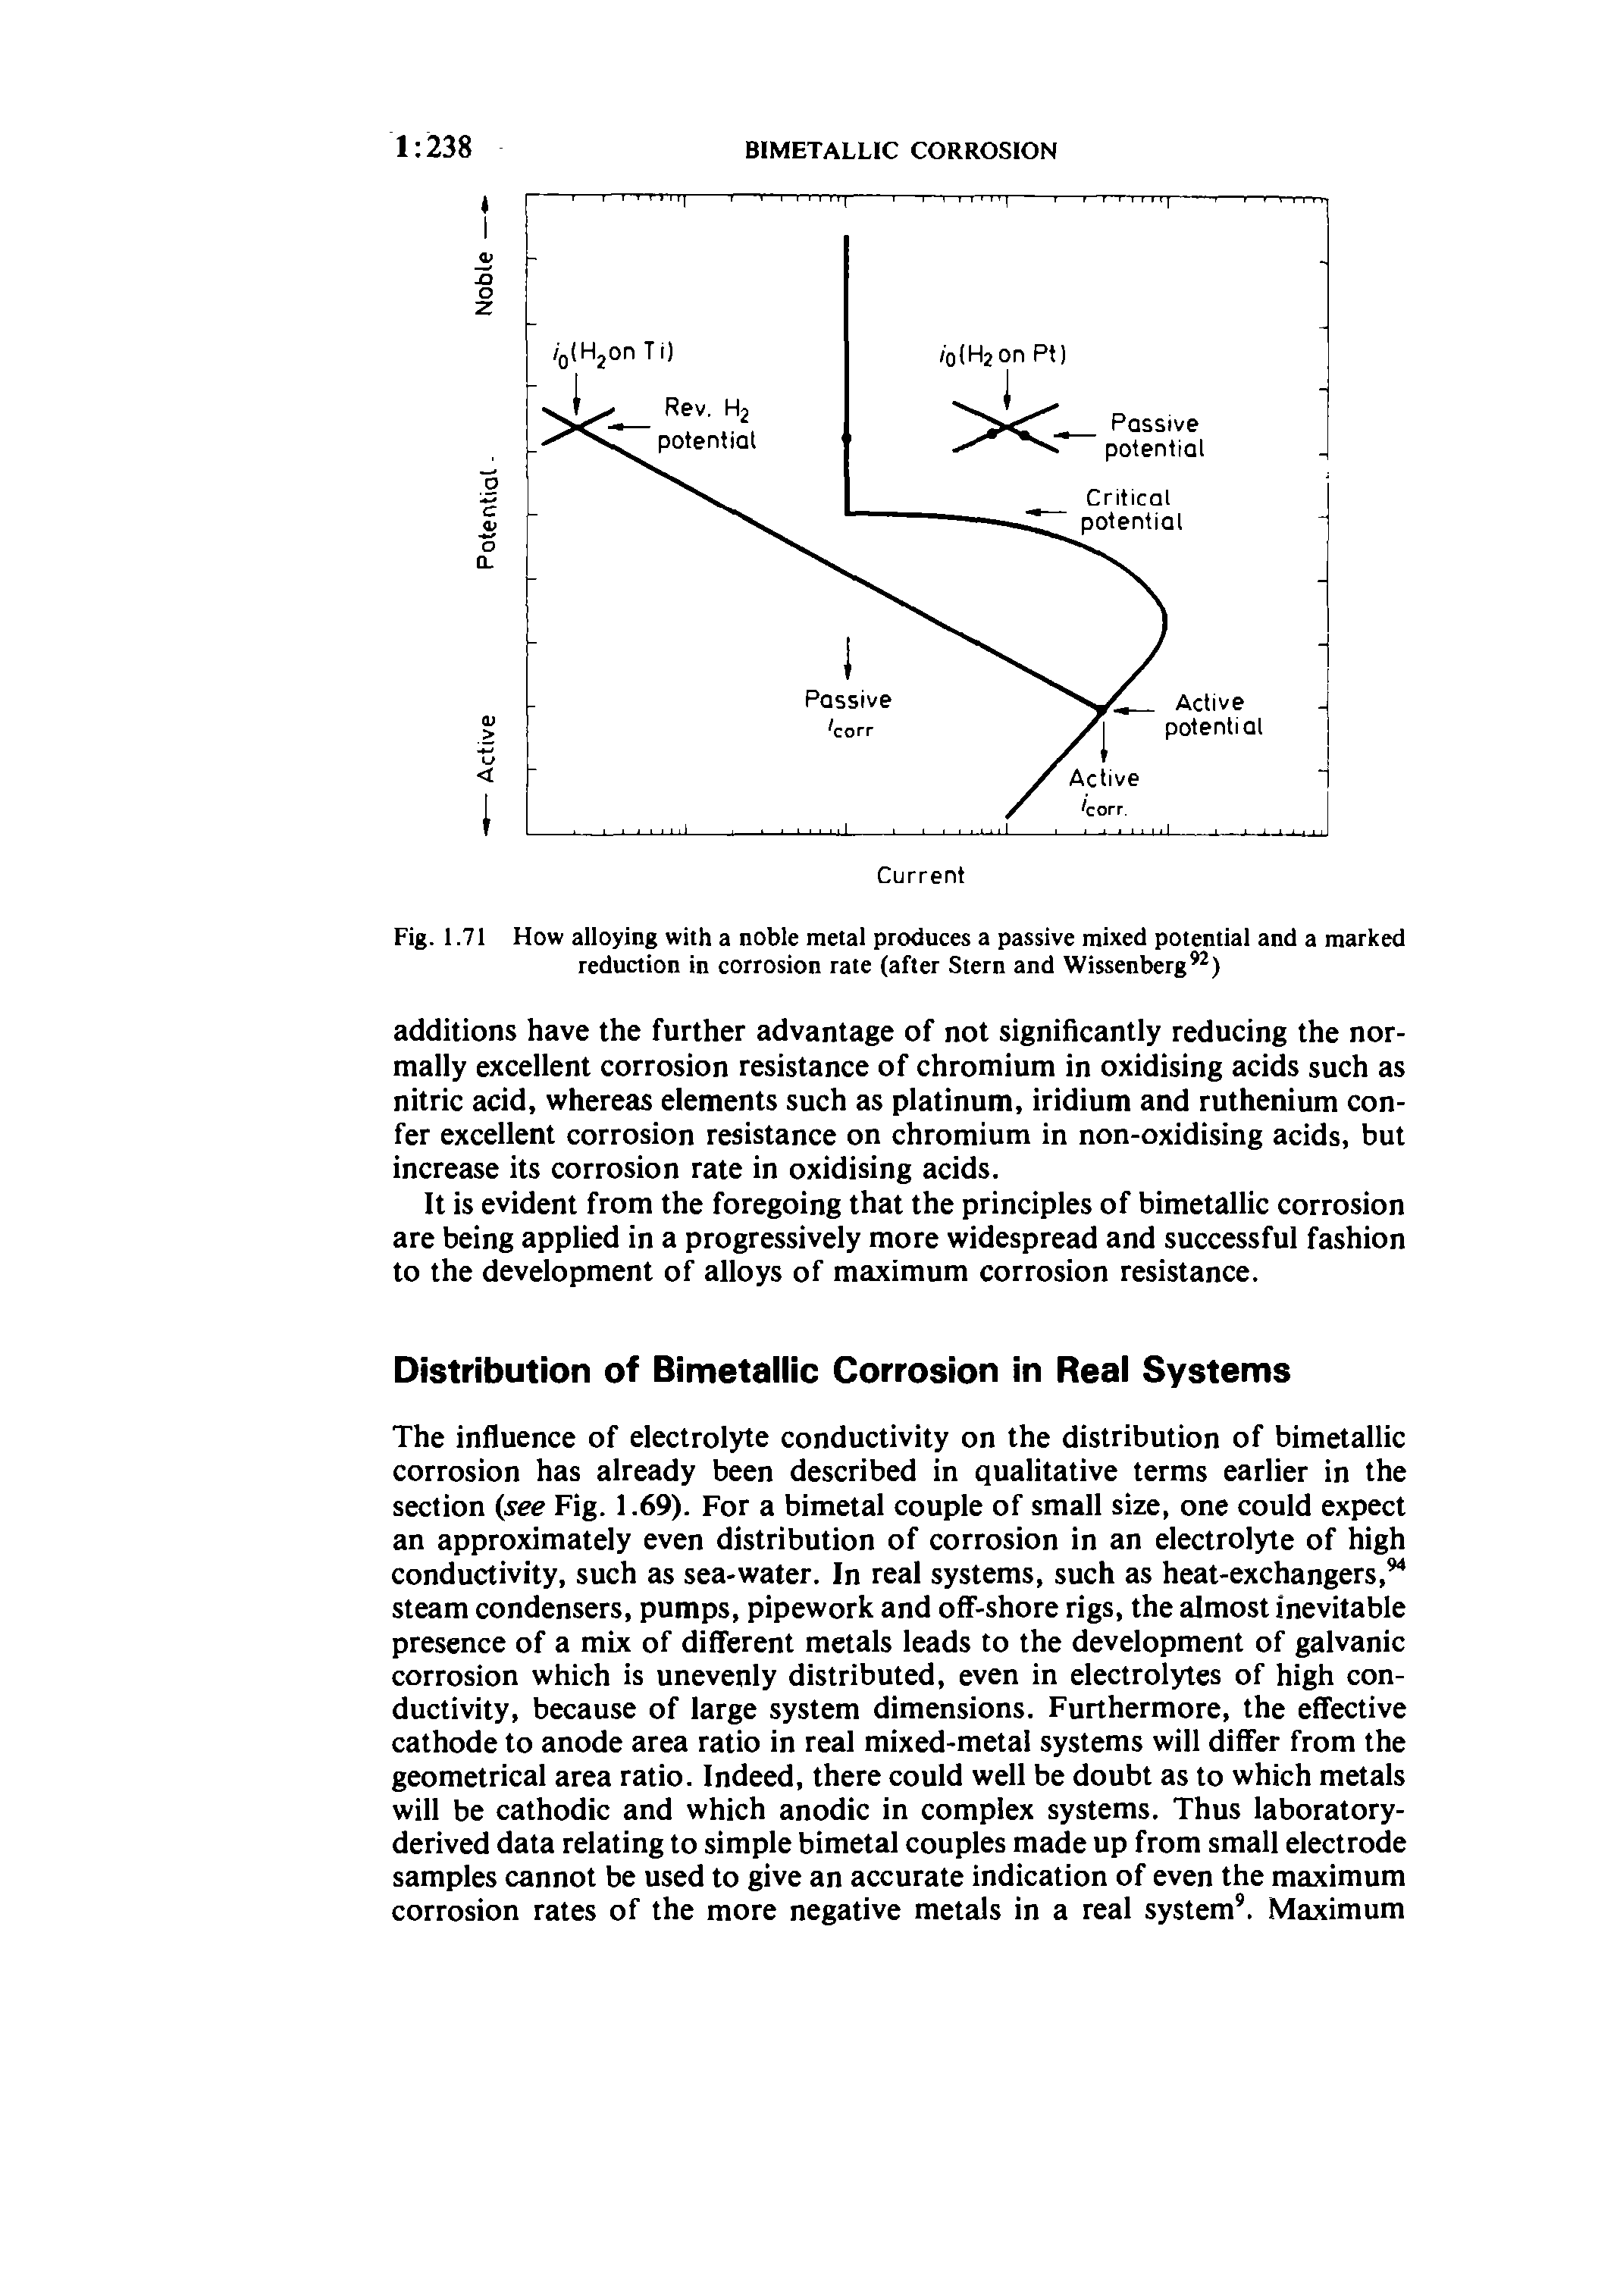 Fig. 1.71 How alloying with a noble metal produces a passive mixed potential and a marked reduction in corrosion rate (after Stern and Wissenberg )...